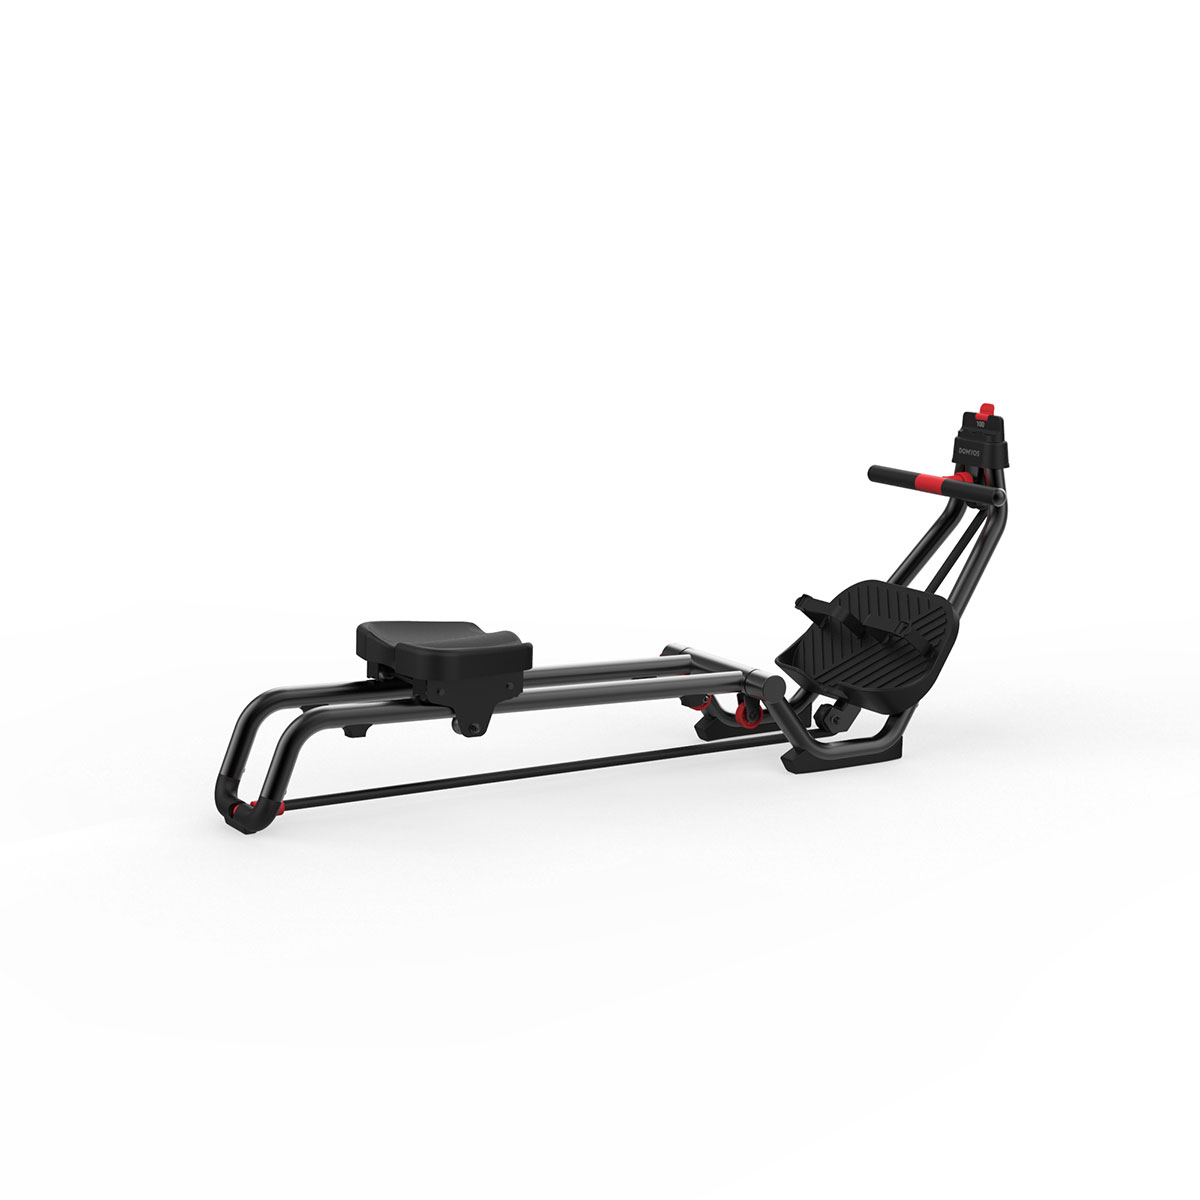 decathlon rowing machine review